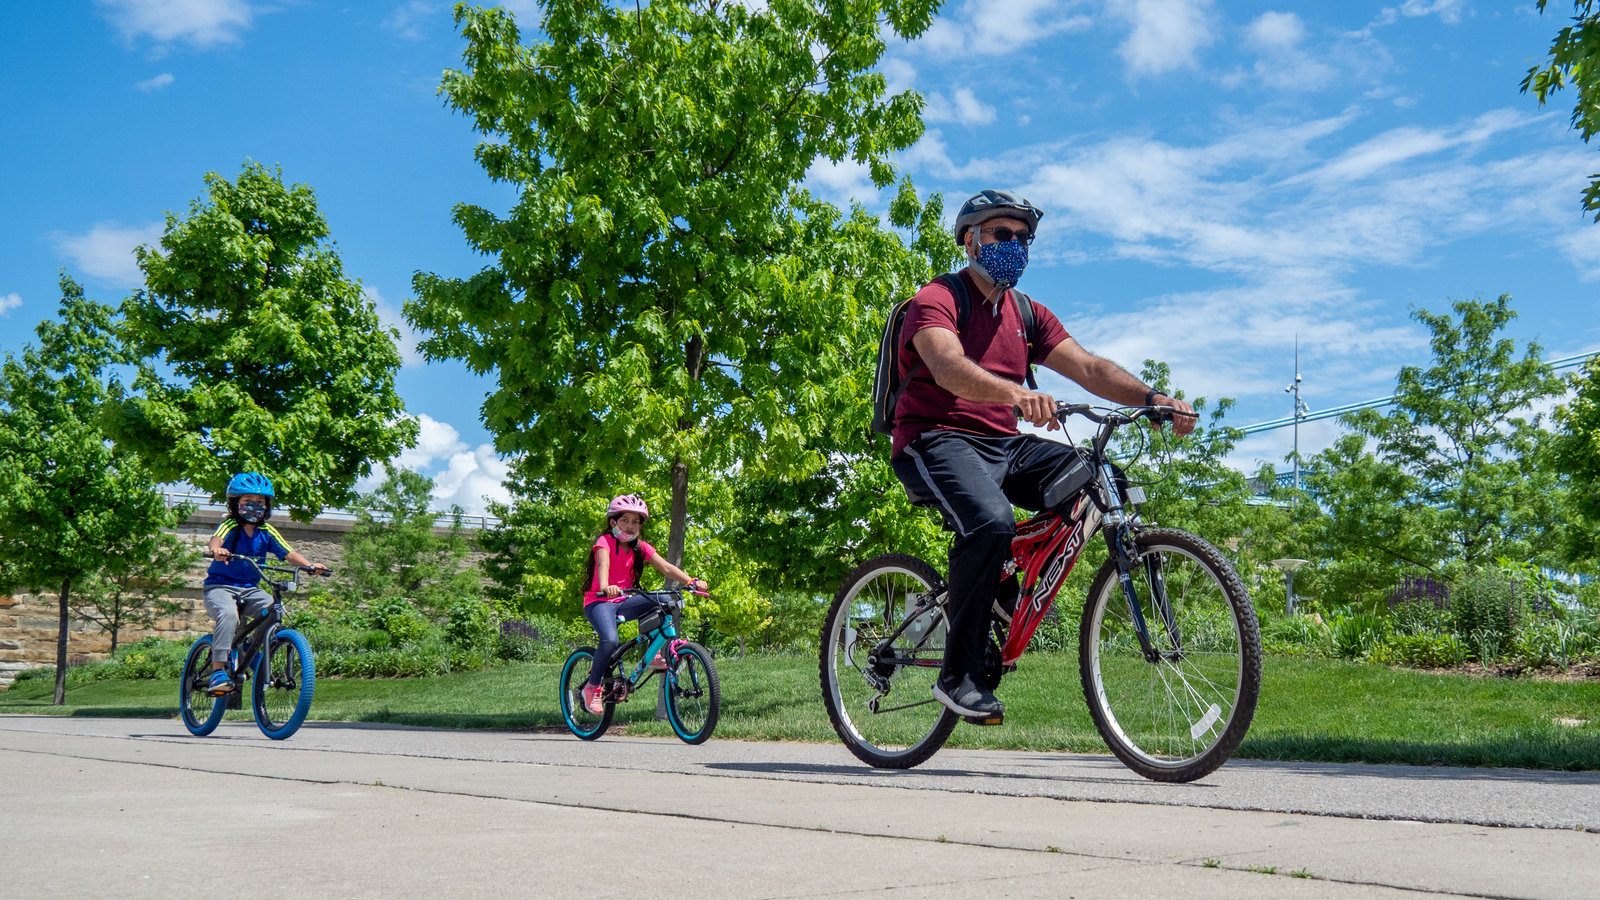 How To Have A Safe Family Bike Ride The New York Times